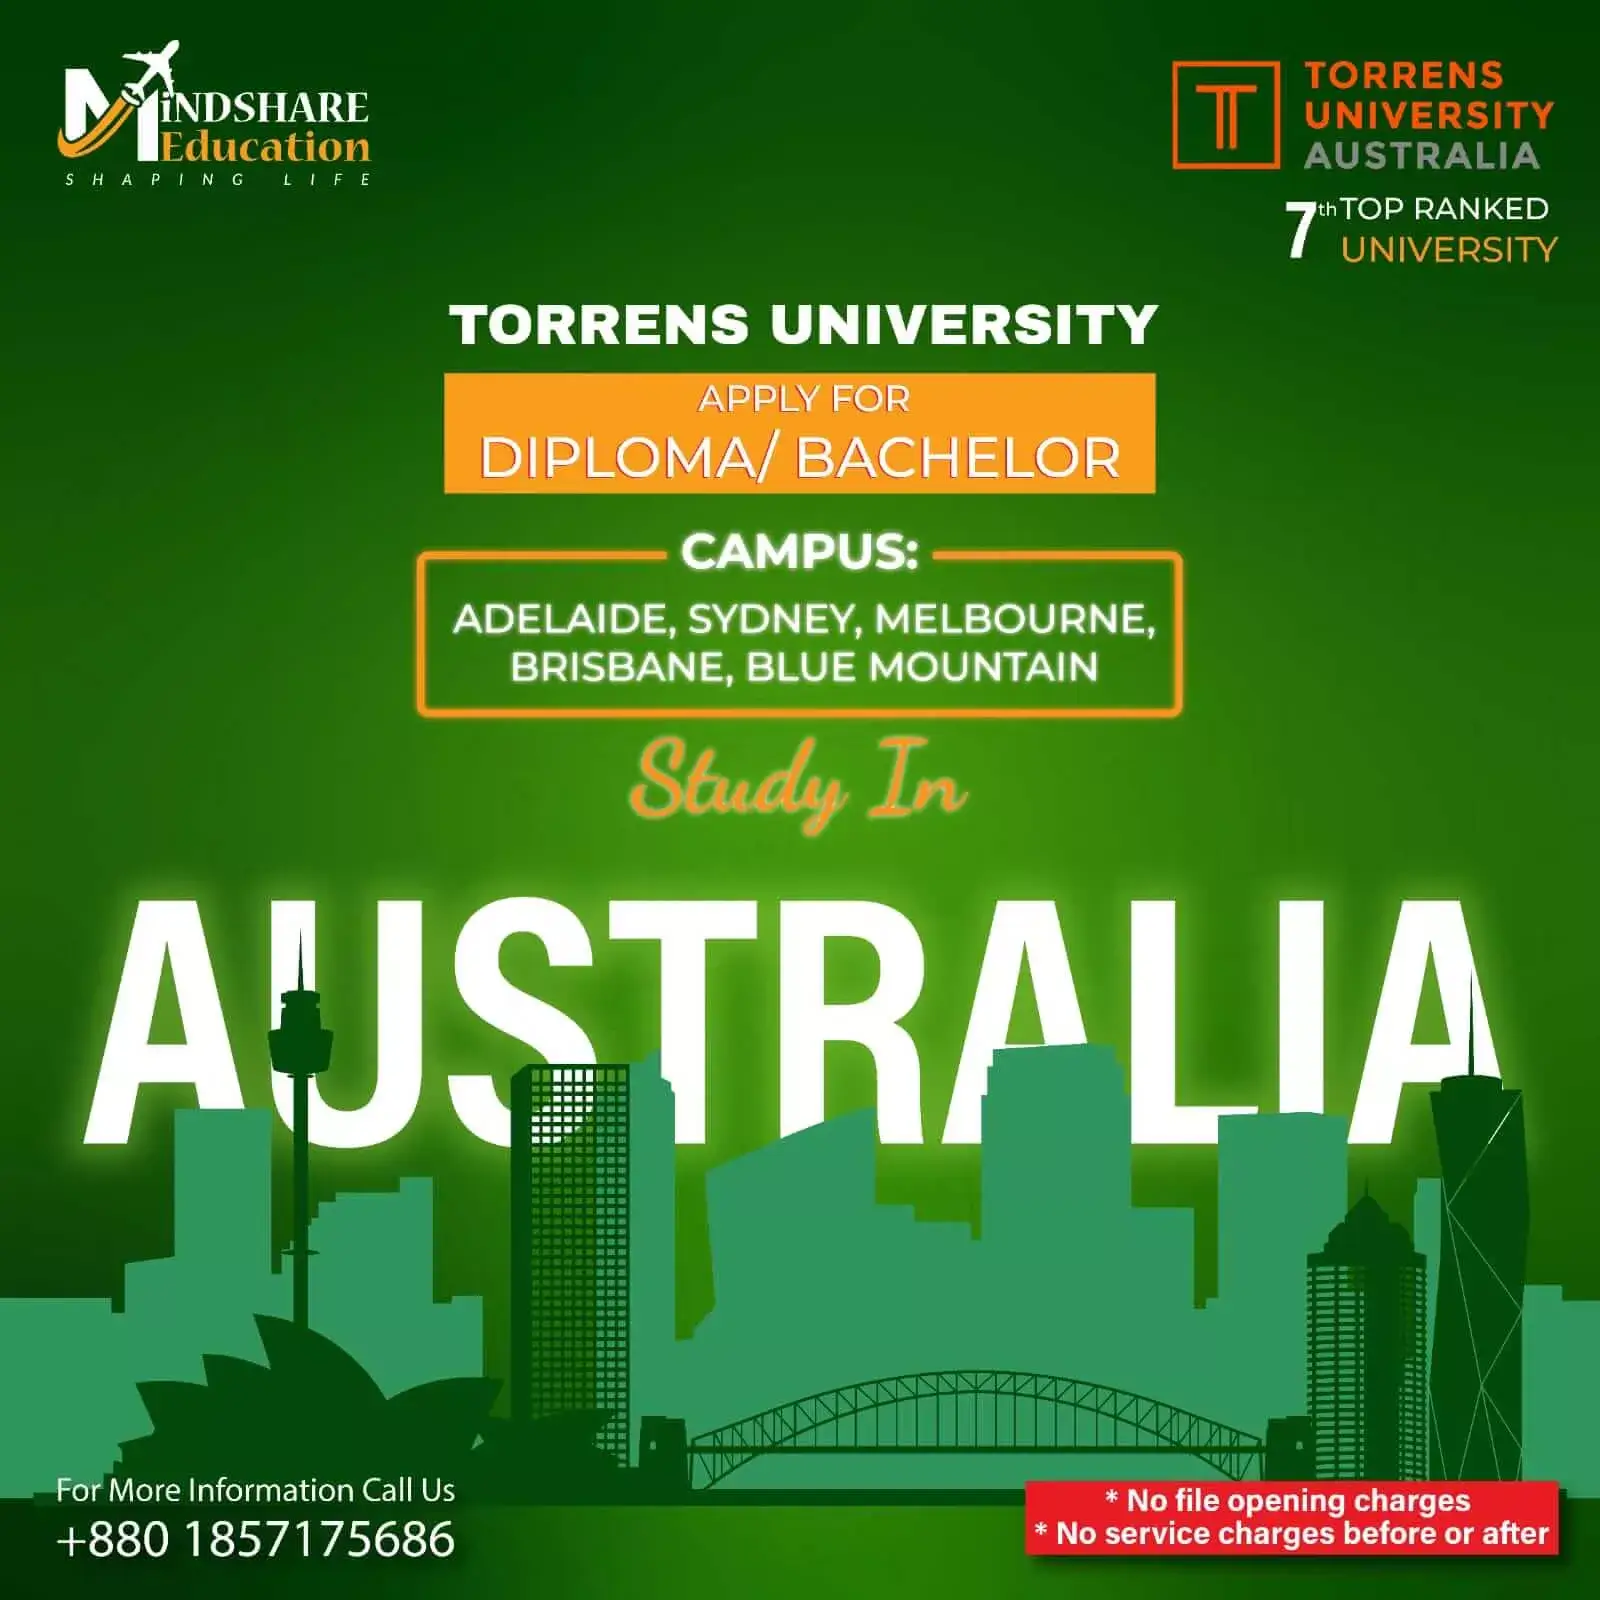 Student in AUSTRALIA progeam by Mindshare Education